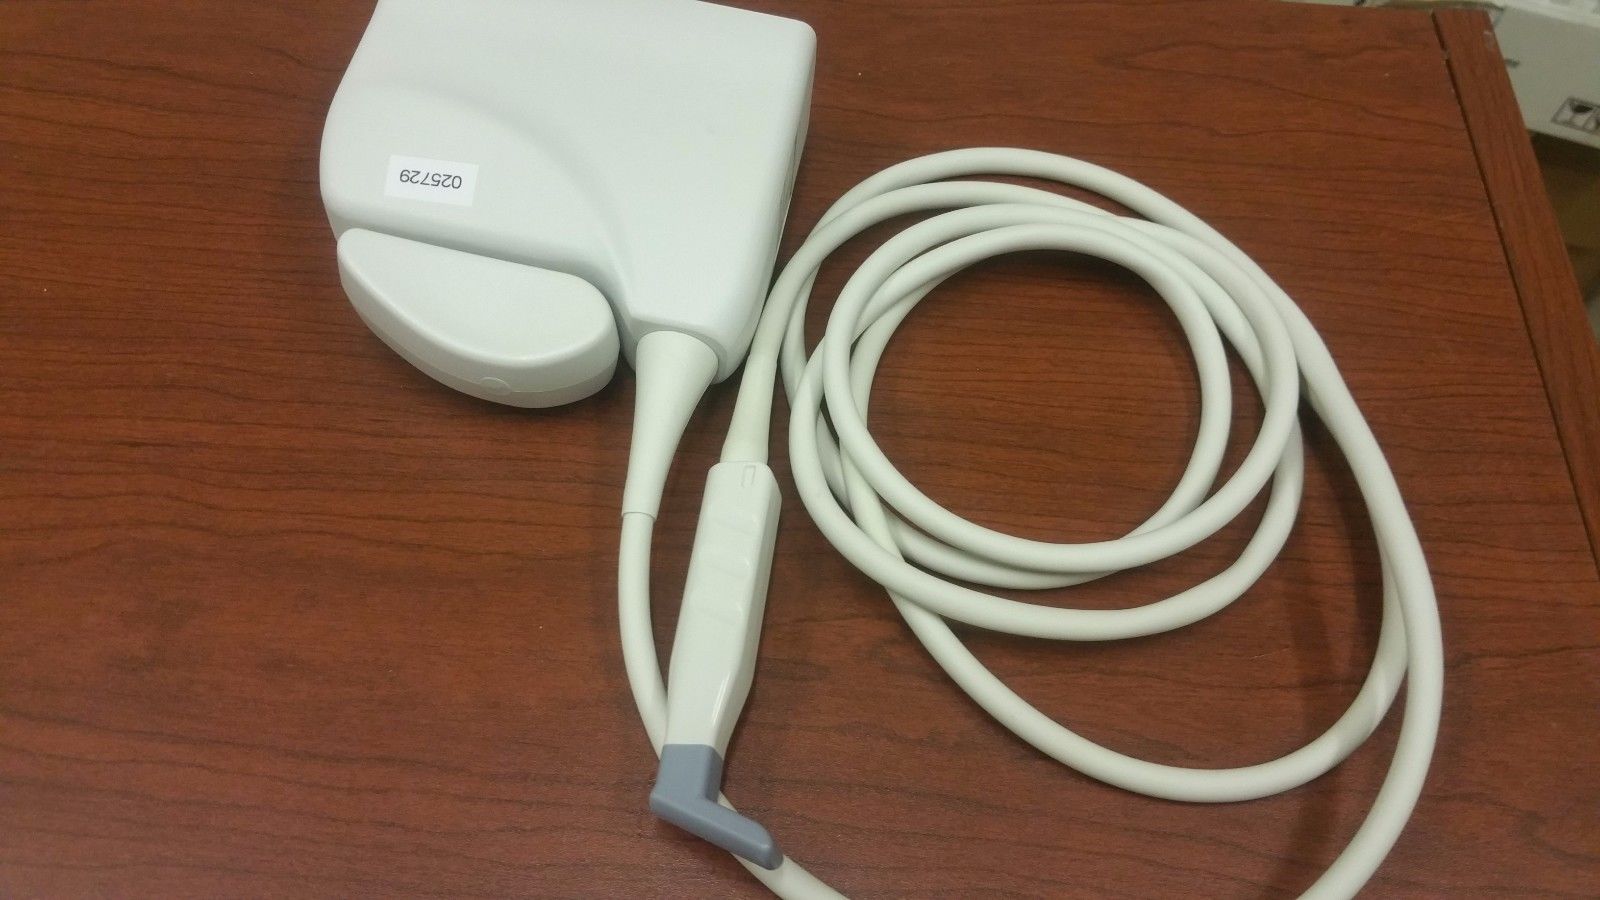 white probe device on a table